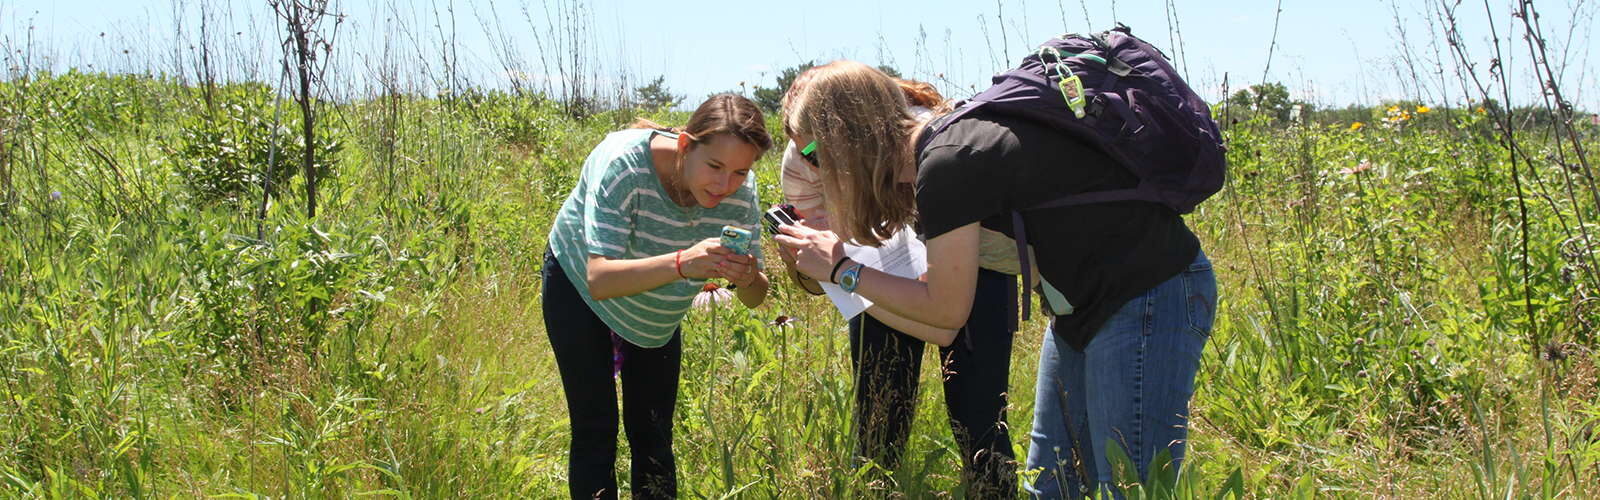 Three students in a grassy field huddling together to take a picture of a native plant